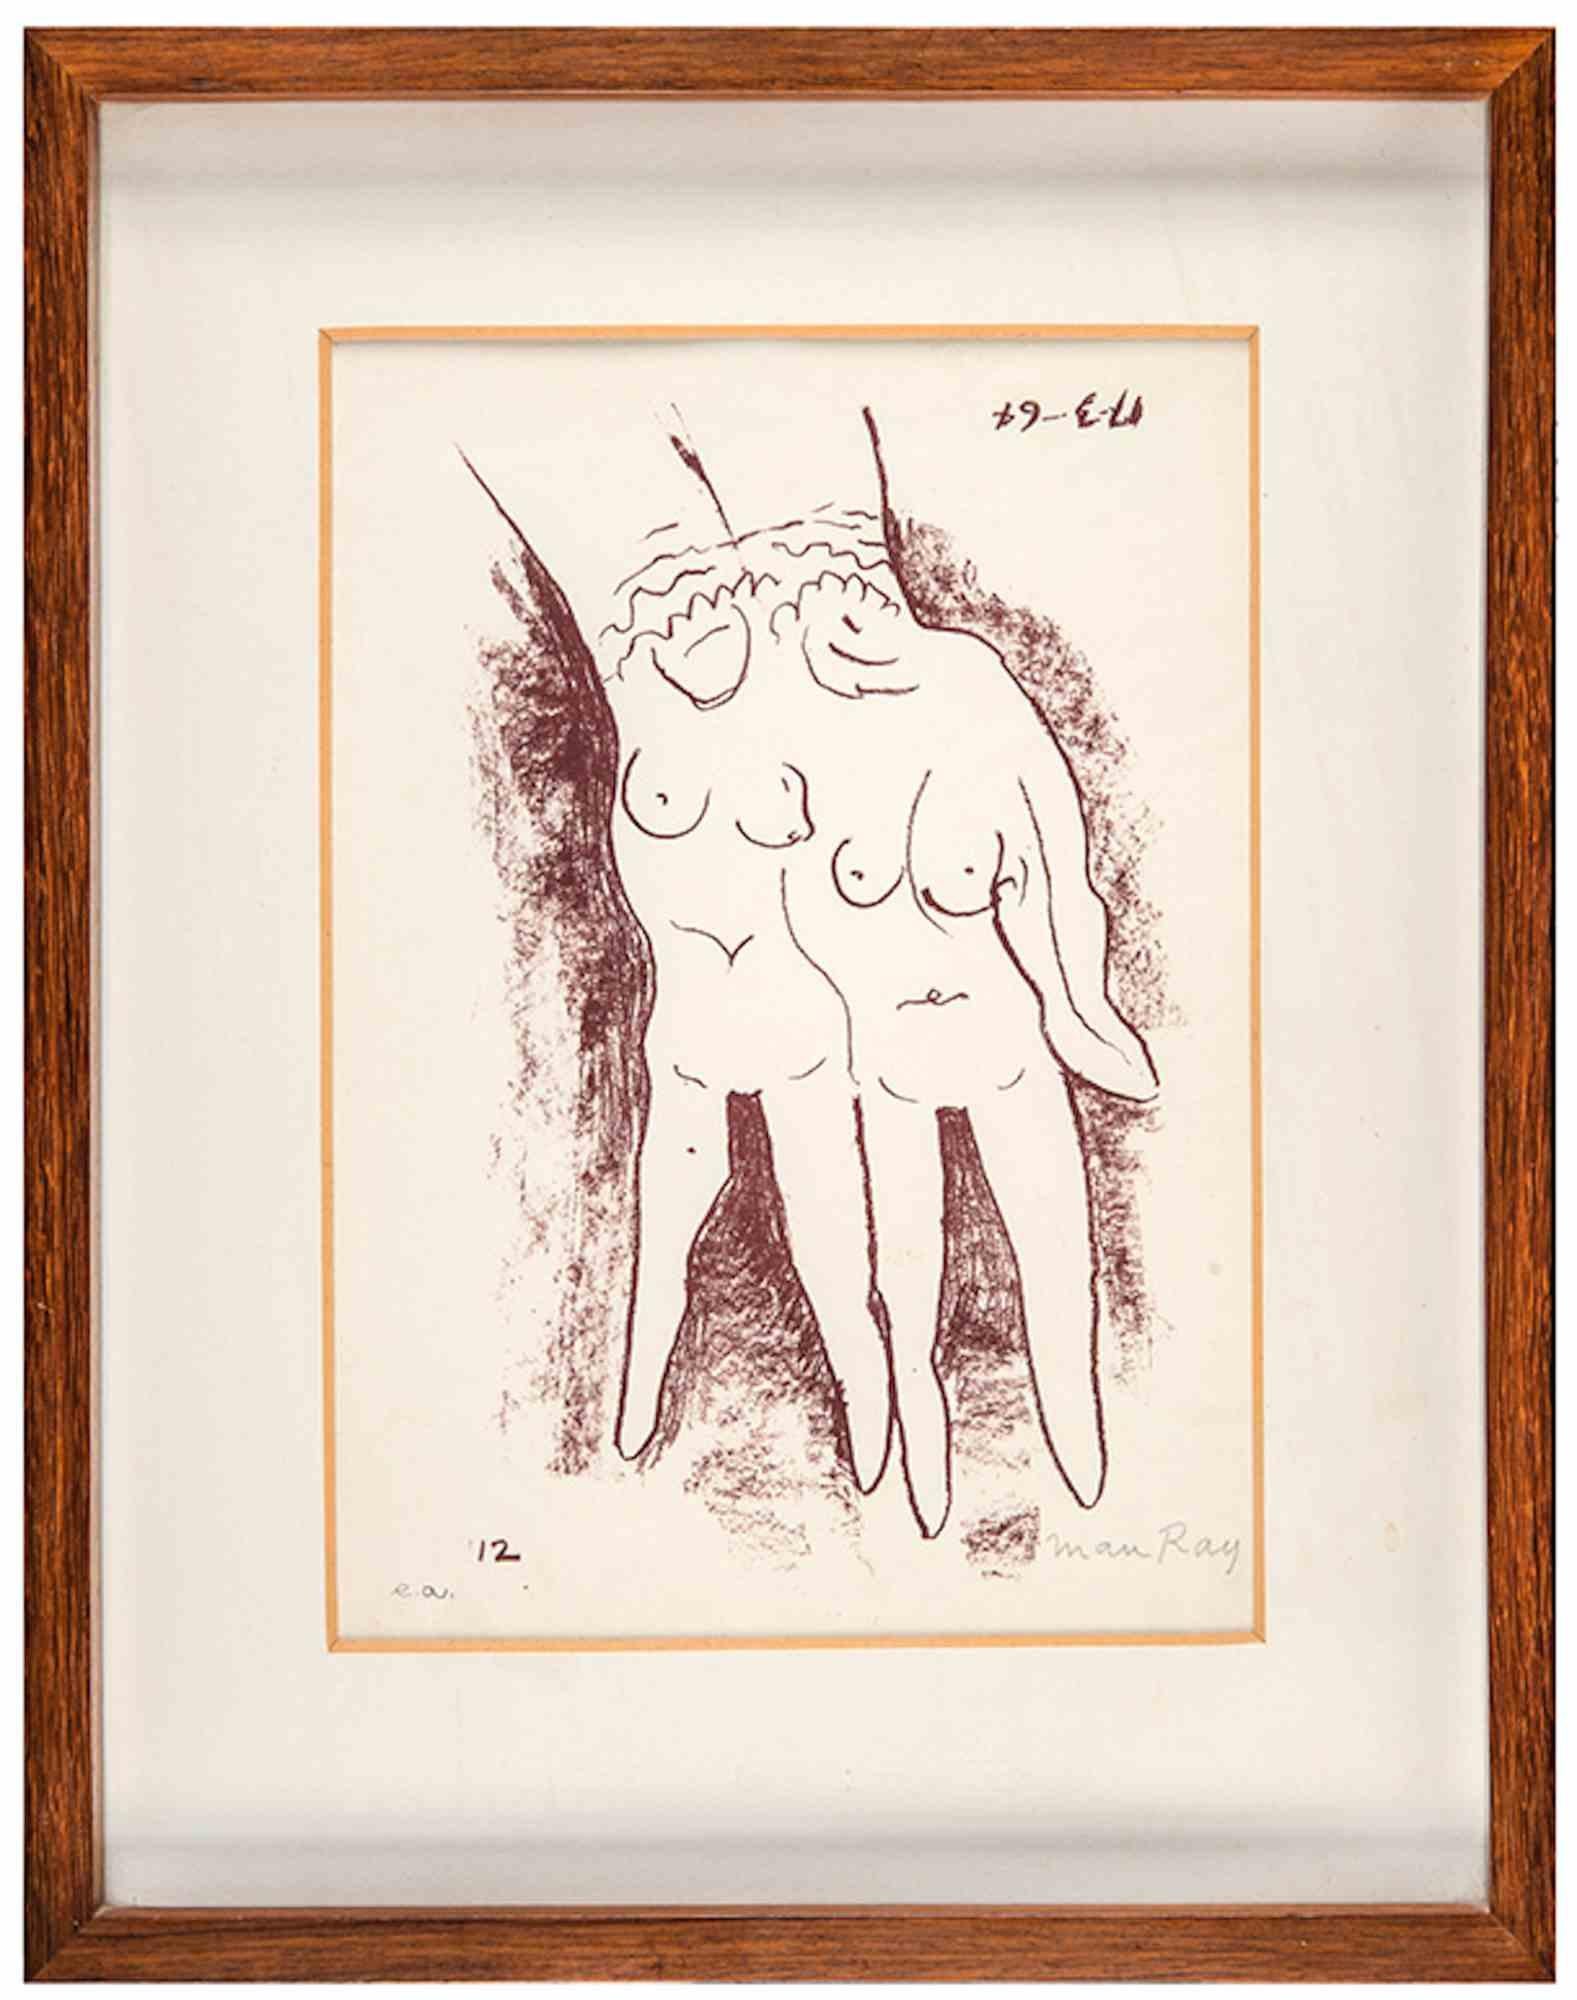 The hand is a lithograph realized by Man Ray in 1964.

Lithograph cm 34x26 .

Hand signed lower right and hand numbered "e.a." lower left . 

Illustration for the volume "The Absolute Real". Provenance: Galleria Gacarù, Milano (label on rear). Ref.